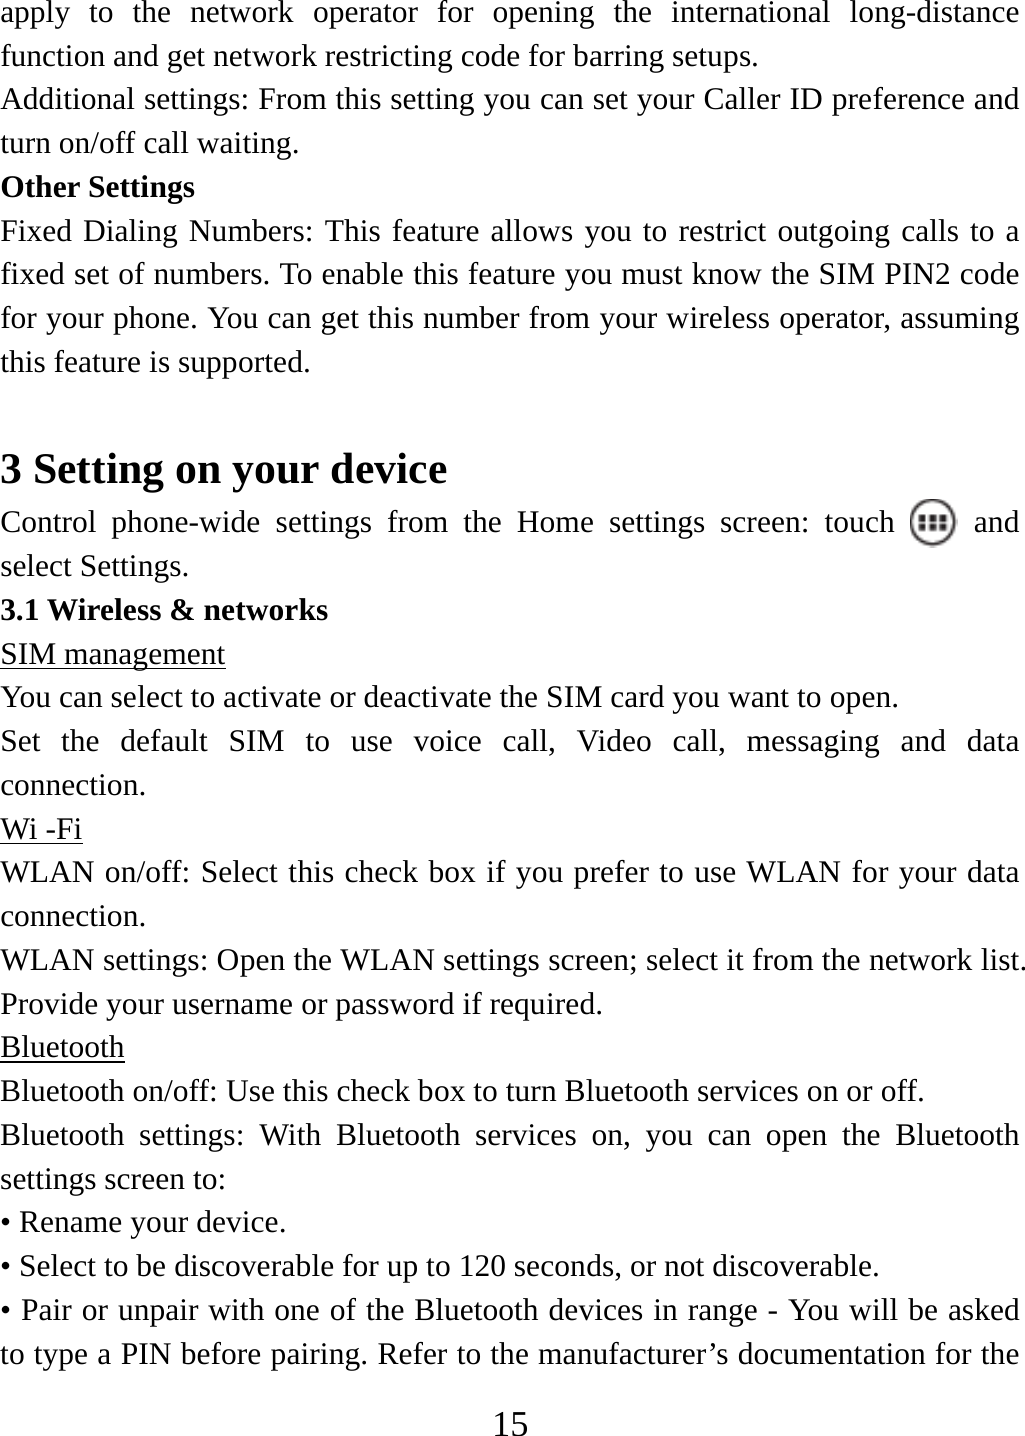   15apply to the network operator for opening the international long-distance function and get network restricting code for barring setups. Additional settings: From this setting you can set your Caller ID preference and turn on/off call waiting.   Other Settings Fixed Dialing Numbers: This feature allows you to restrict outgoing calls to a fixed set of numbers. To enable this feature you must know the SIM PIN2 code for your phone. You can get this number from your wireless operator, assuming this feature is supported.    3 Setting on your device Control phone-wide settings from the Home settings screen: touch   and select Settings.   3.1 Wireless &amp; networks SIM management You can select to activate or deactivate the SIM card you want to open. Set the default SIM to use voice call, Video call, messaging and data connection. Wi -Fi WLAN on/off: Select this check box if you prefer to use WLAN for your data connection.  WLAN settings: Open the WLAN settings screen; select it from the network list. Provide your username or password if required.   Bluetooth Bluetooth on/off: Use this check box to turn Bluetooth services on or off.   Bluetooth settings: With Bluetooth services on, you can open the Bluetooth settings screen to: • Rename your device. • Select to be discoverable for up to 120 seconds, or not discoverable.   • Pair or unpair with one of the Bluetooth devices in range - You will be asked to type a PIN before pairing. Refer to the manufacturer’s documentation for the 